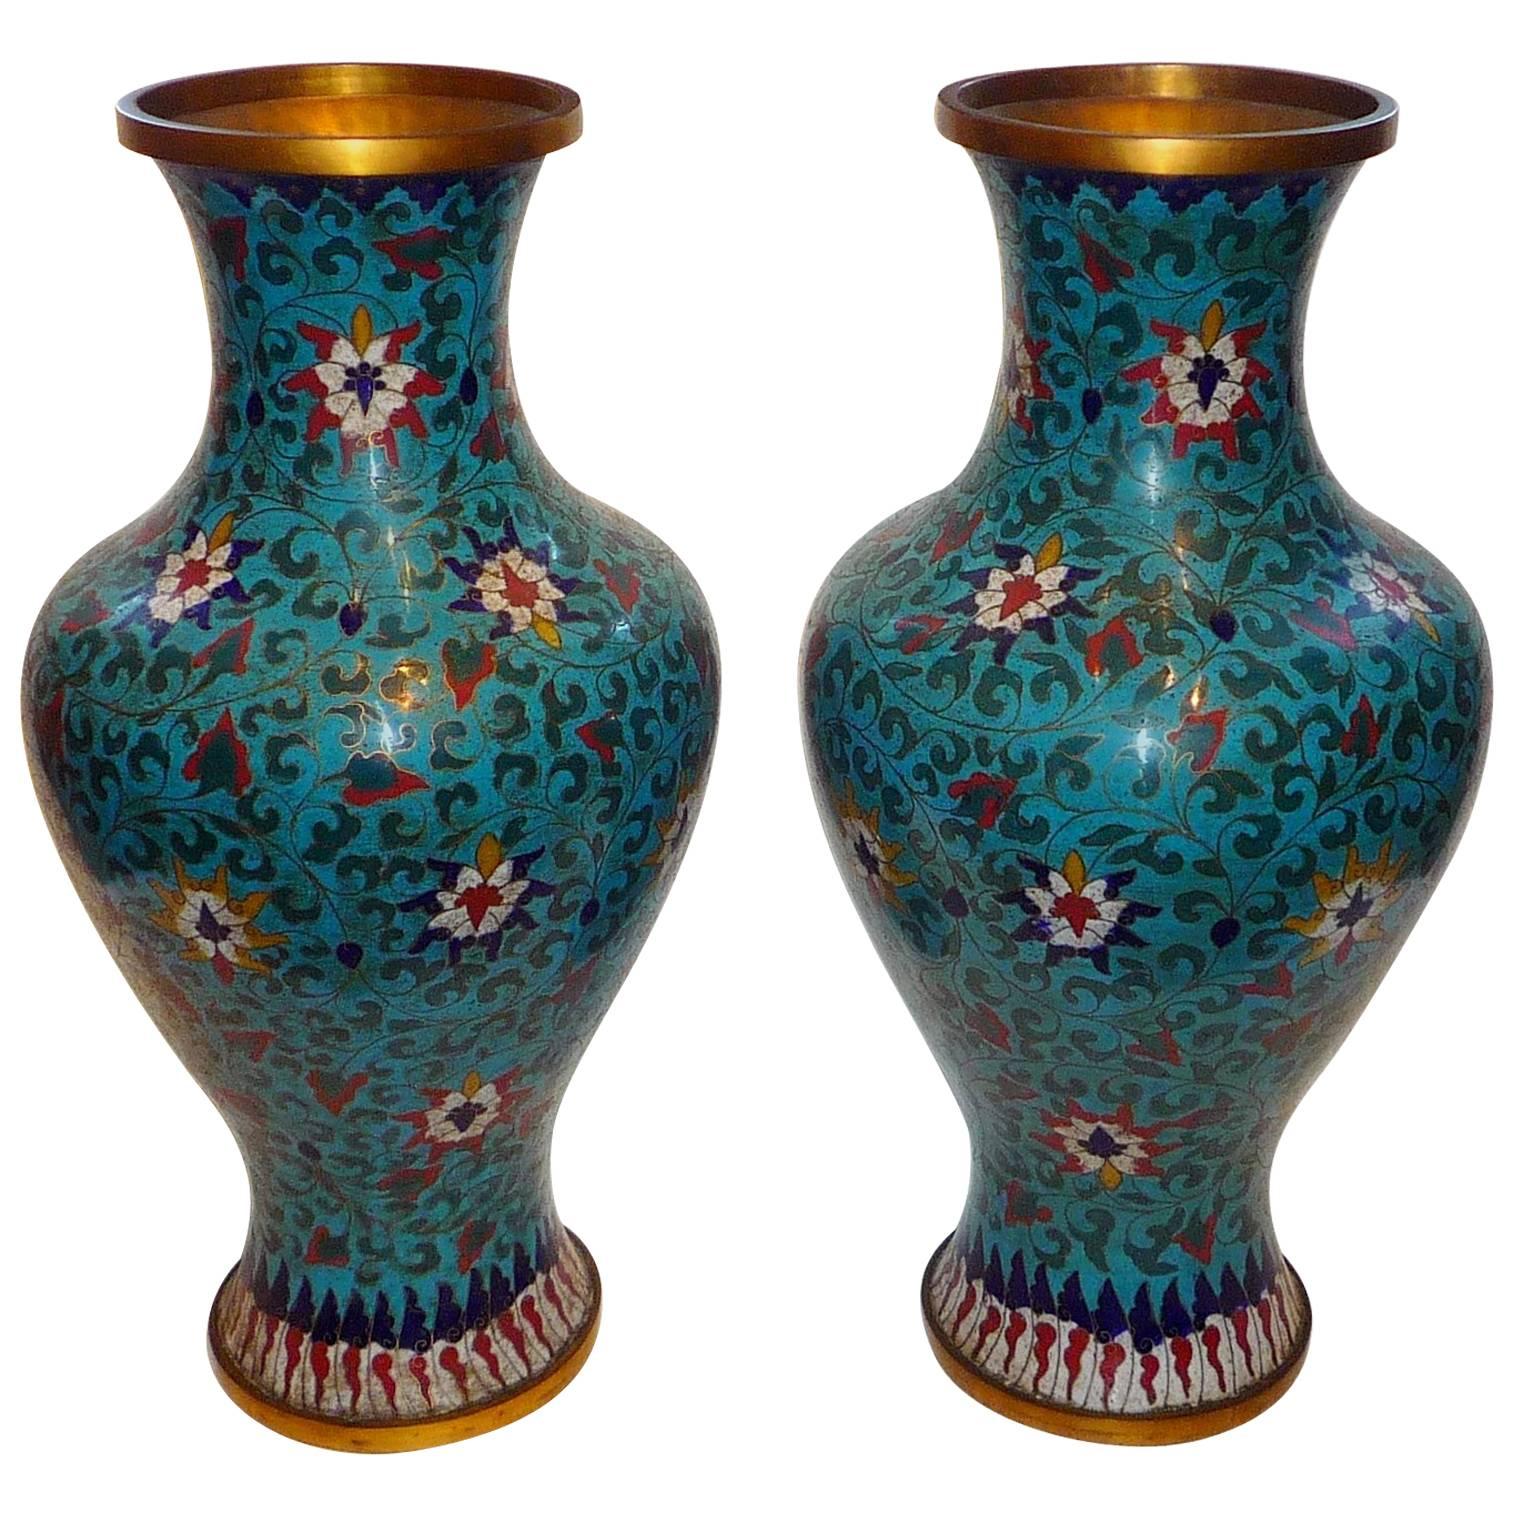 Pair of Large 19th Century Chinese Cloisonné on Blue Back Ground Vases